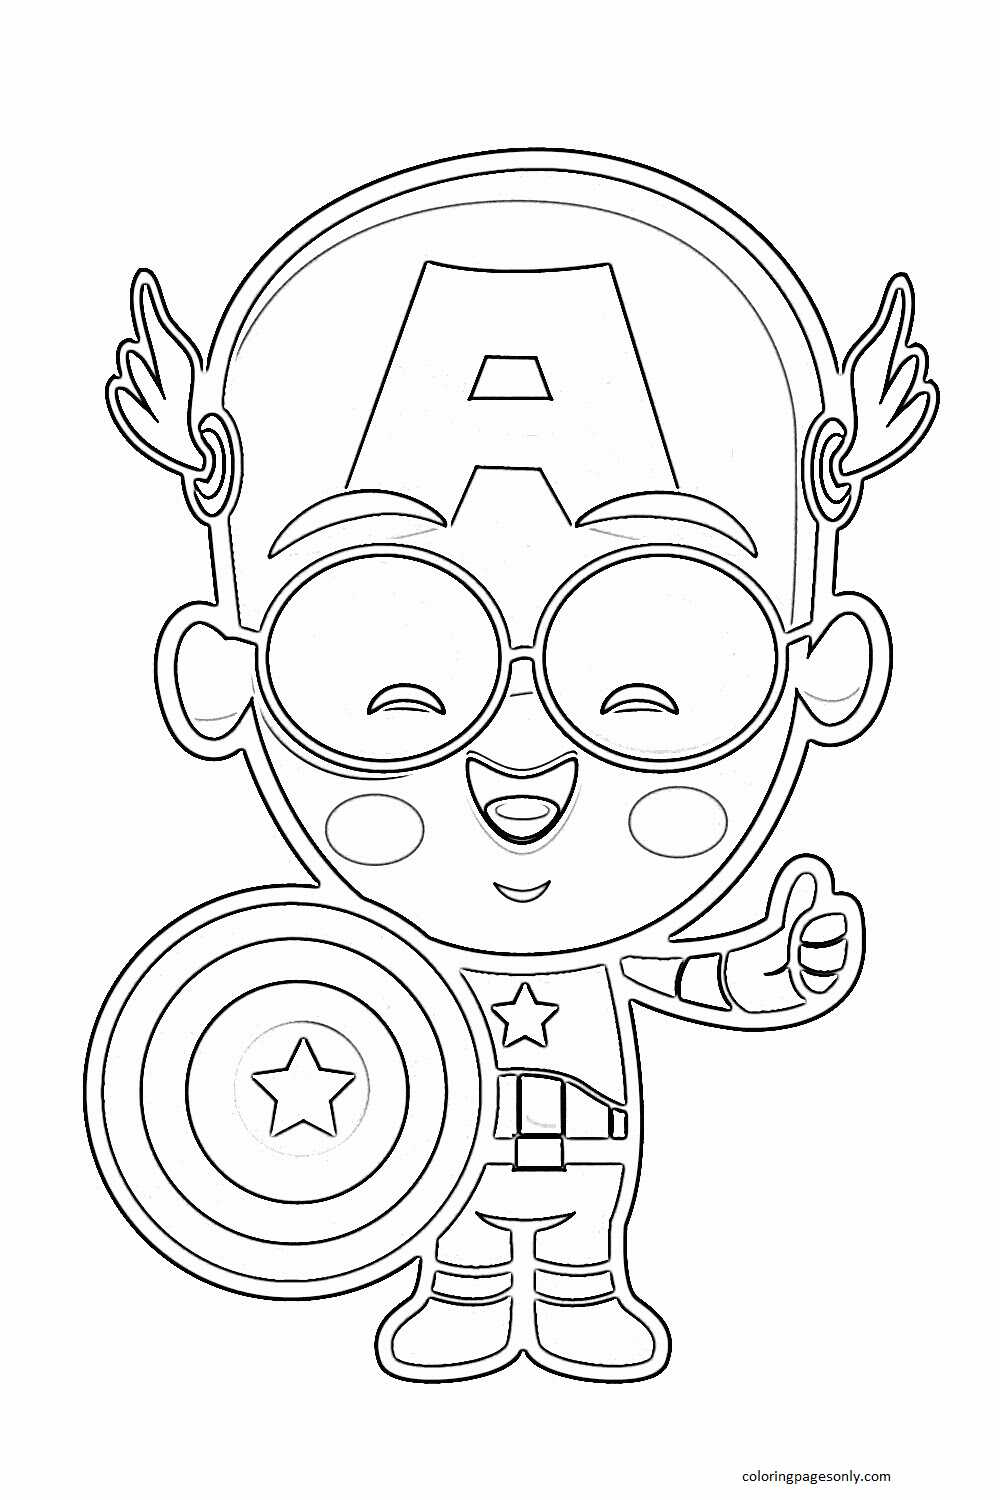 Cartoon Avengers Captain America Coloring Pages